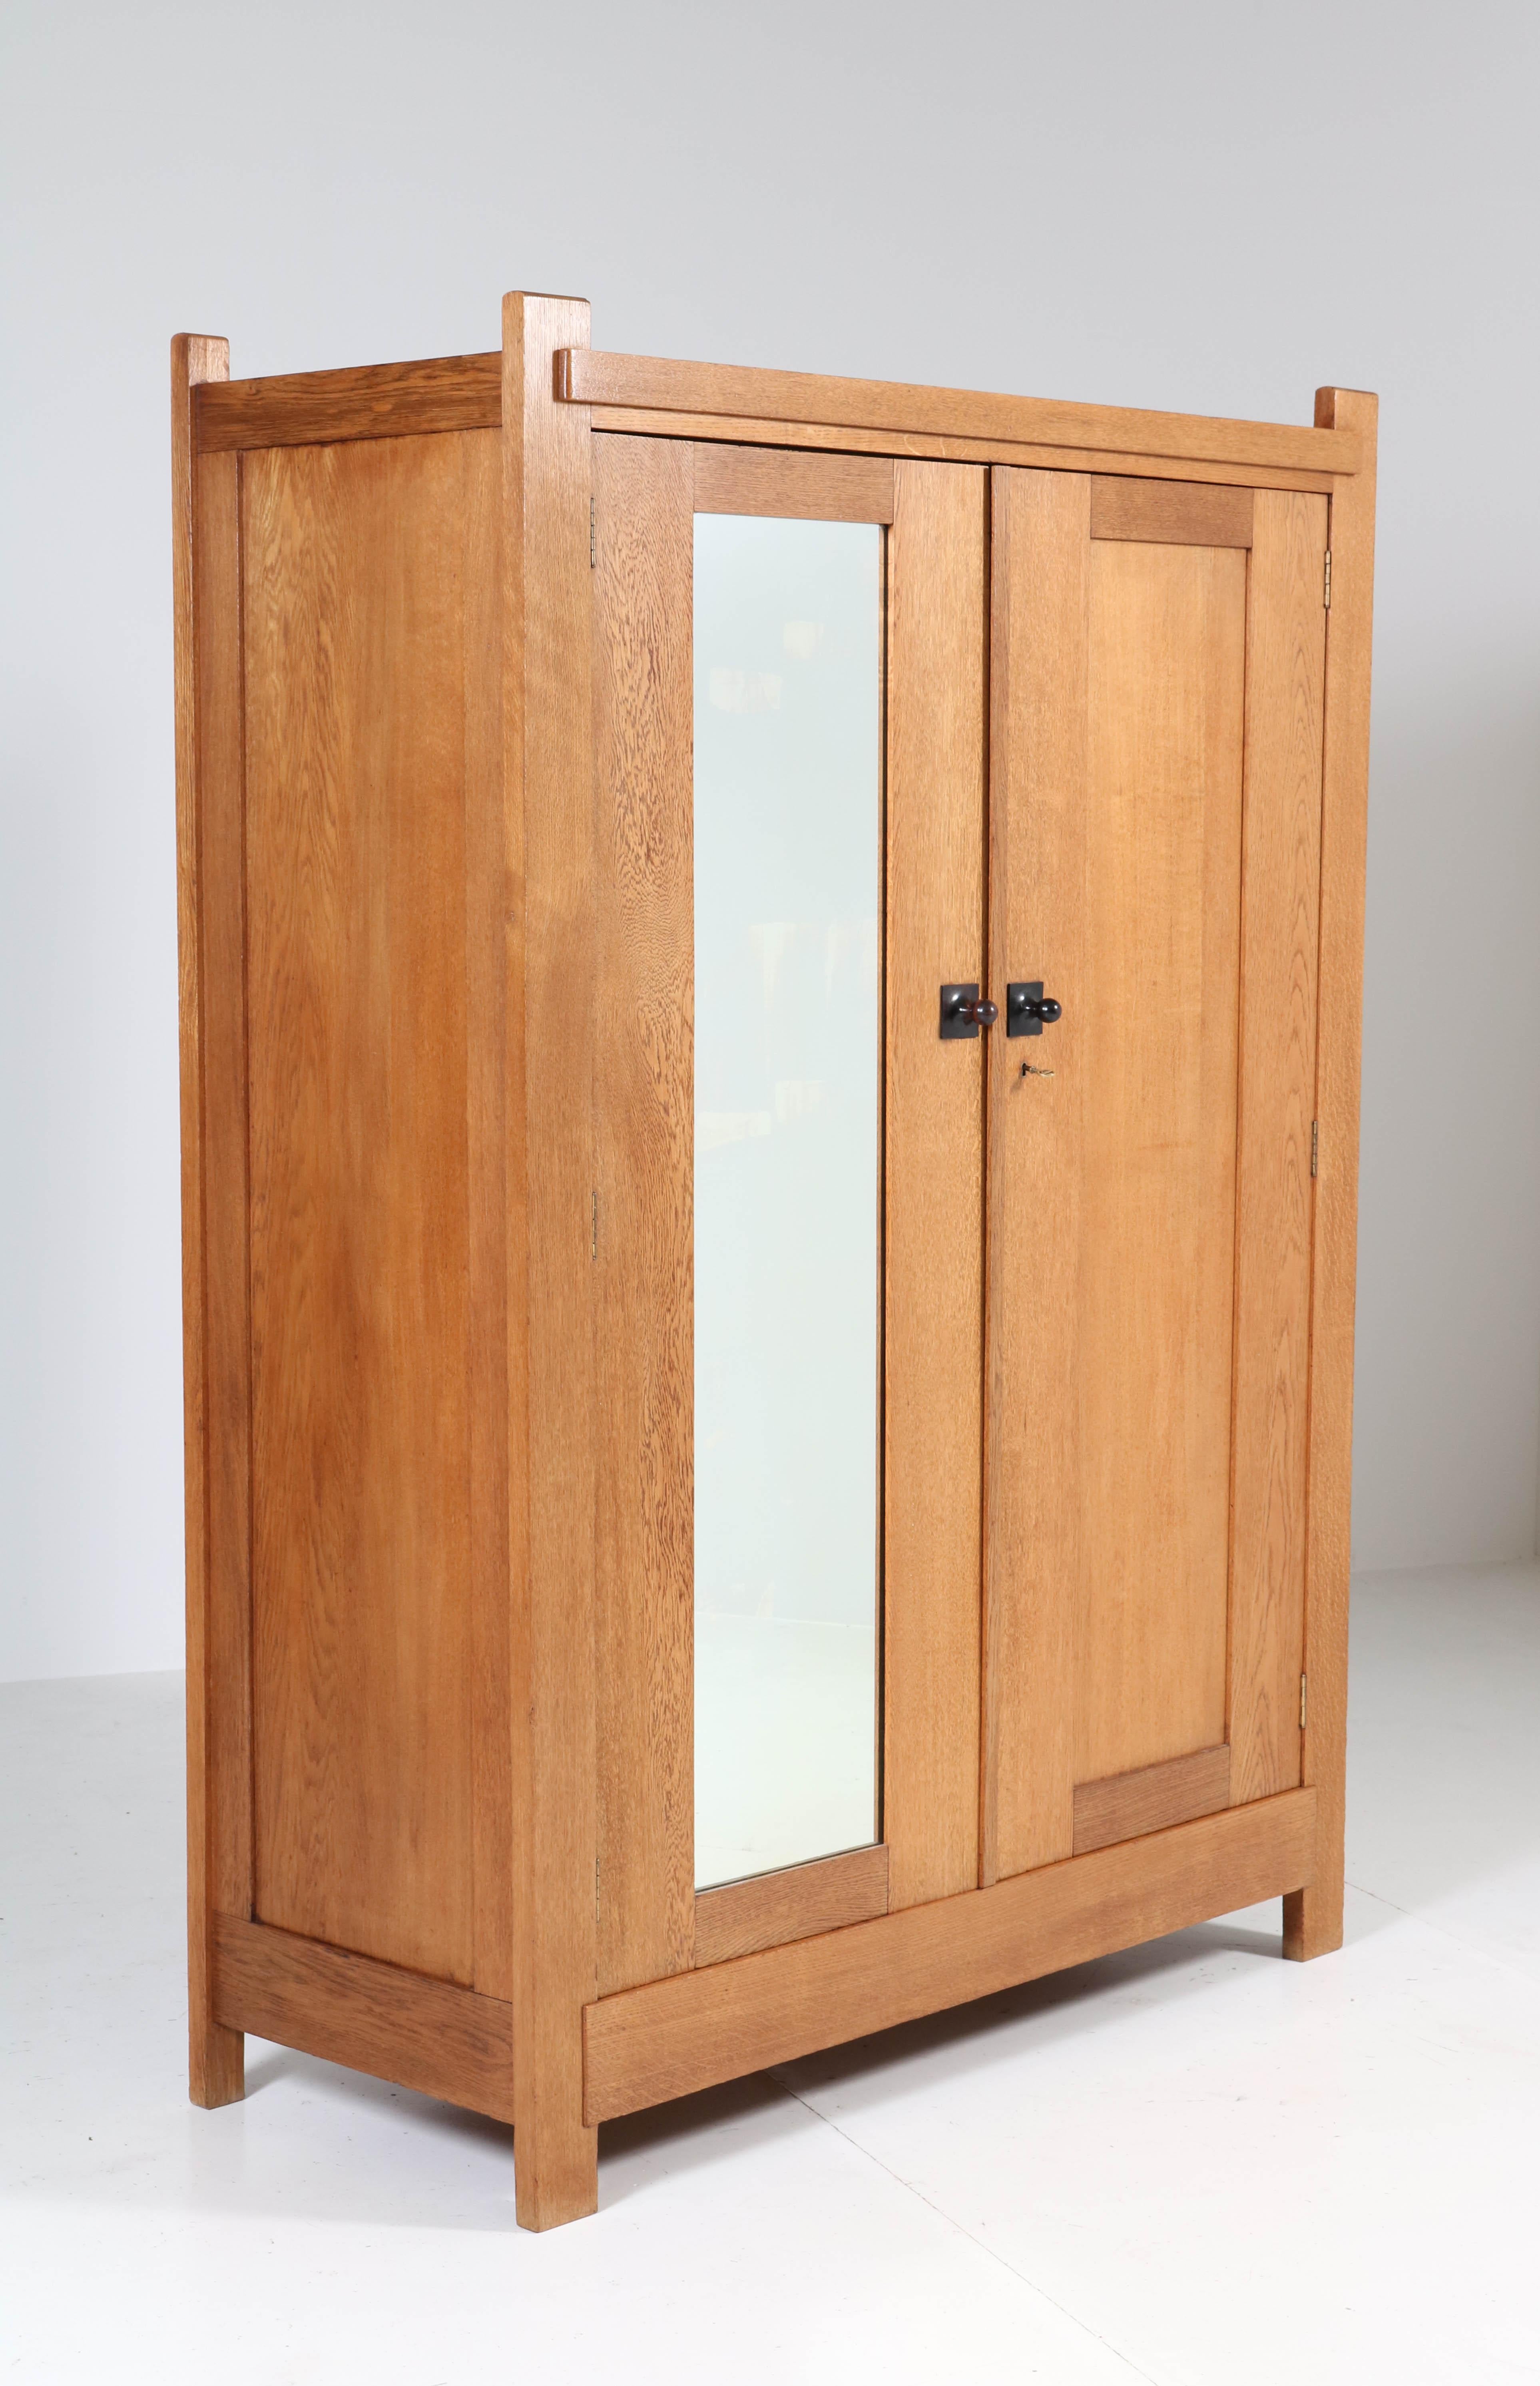 Stunning Art Deco Haagse School armoir or wardrobe.
Design by Henk Wouda for H. Pander & Zonen.
Striking Dutch design from the 1920s.
Solid oak with original black lacquered wooden knobs.
Marked with metal tag and brand mark and original Pander